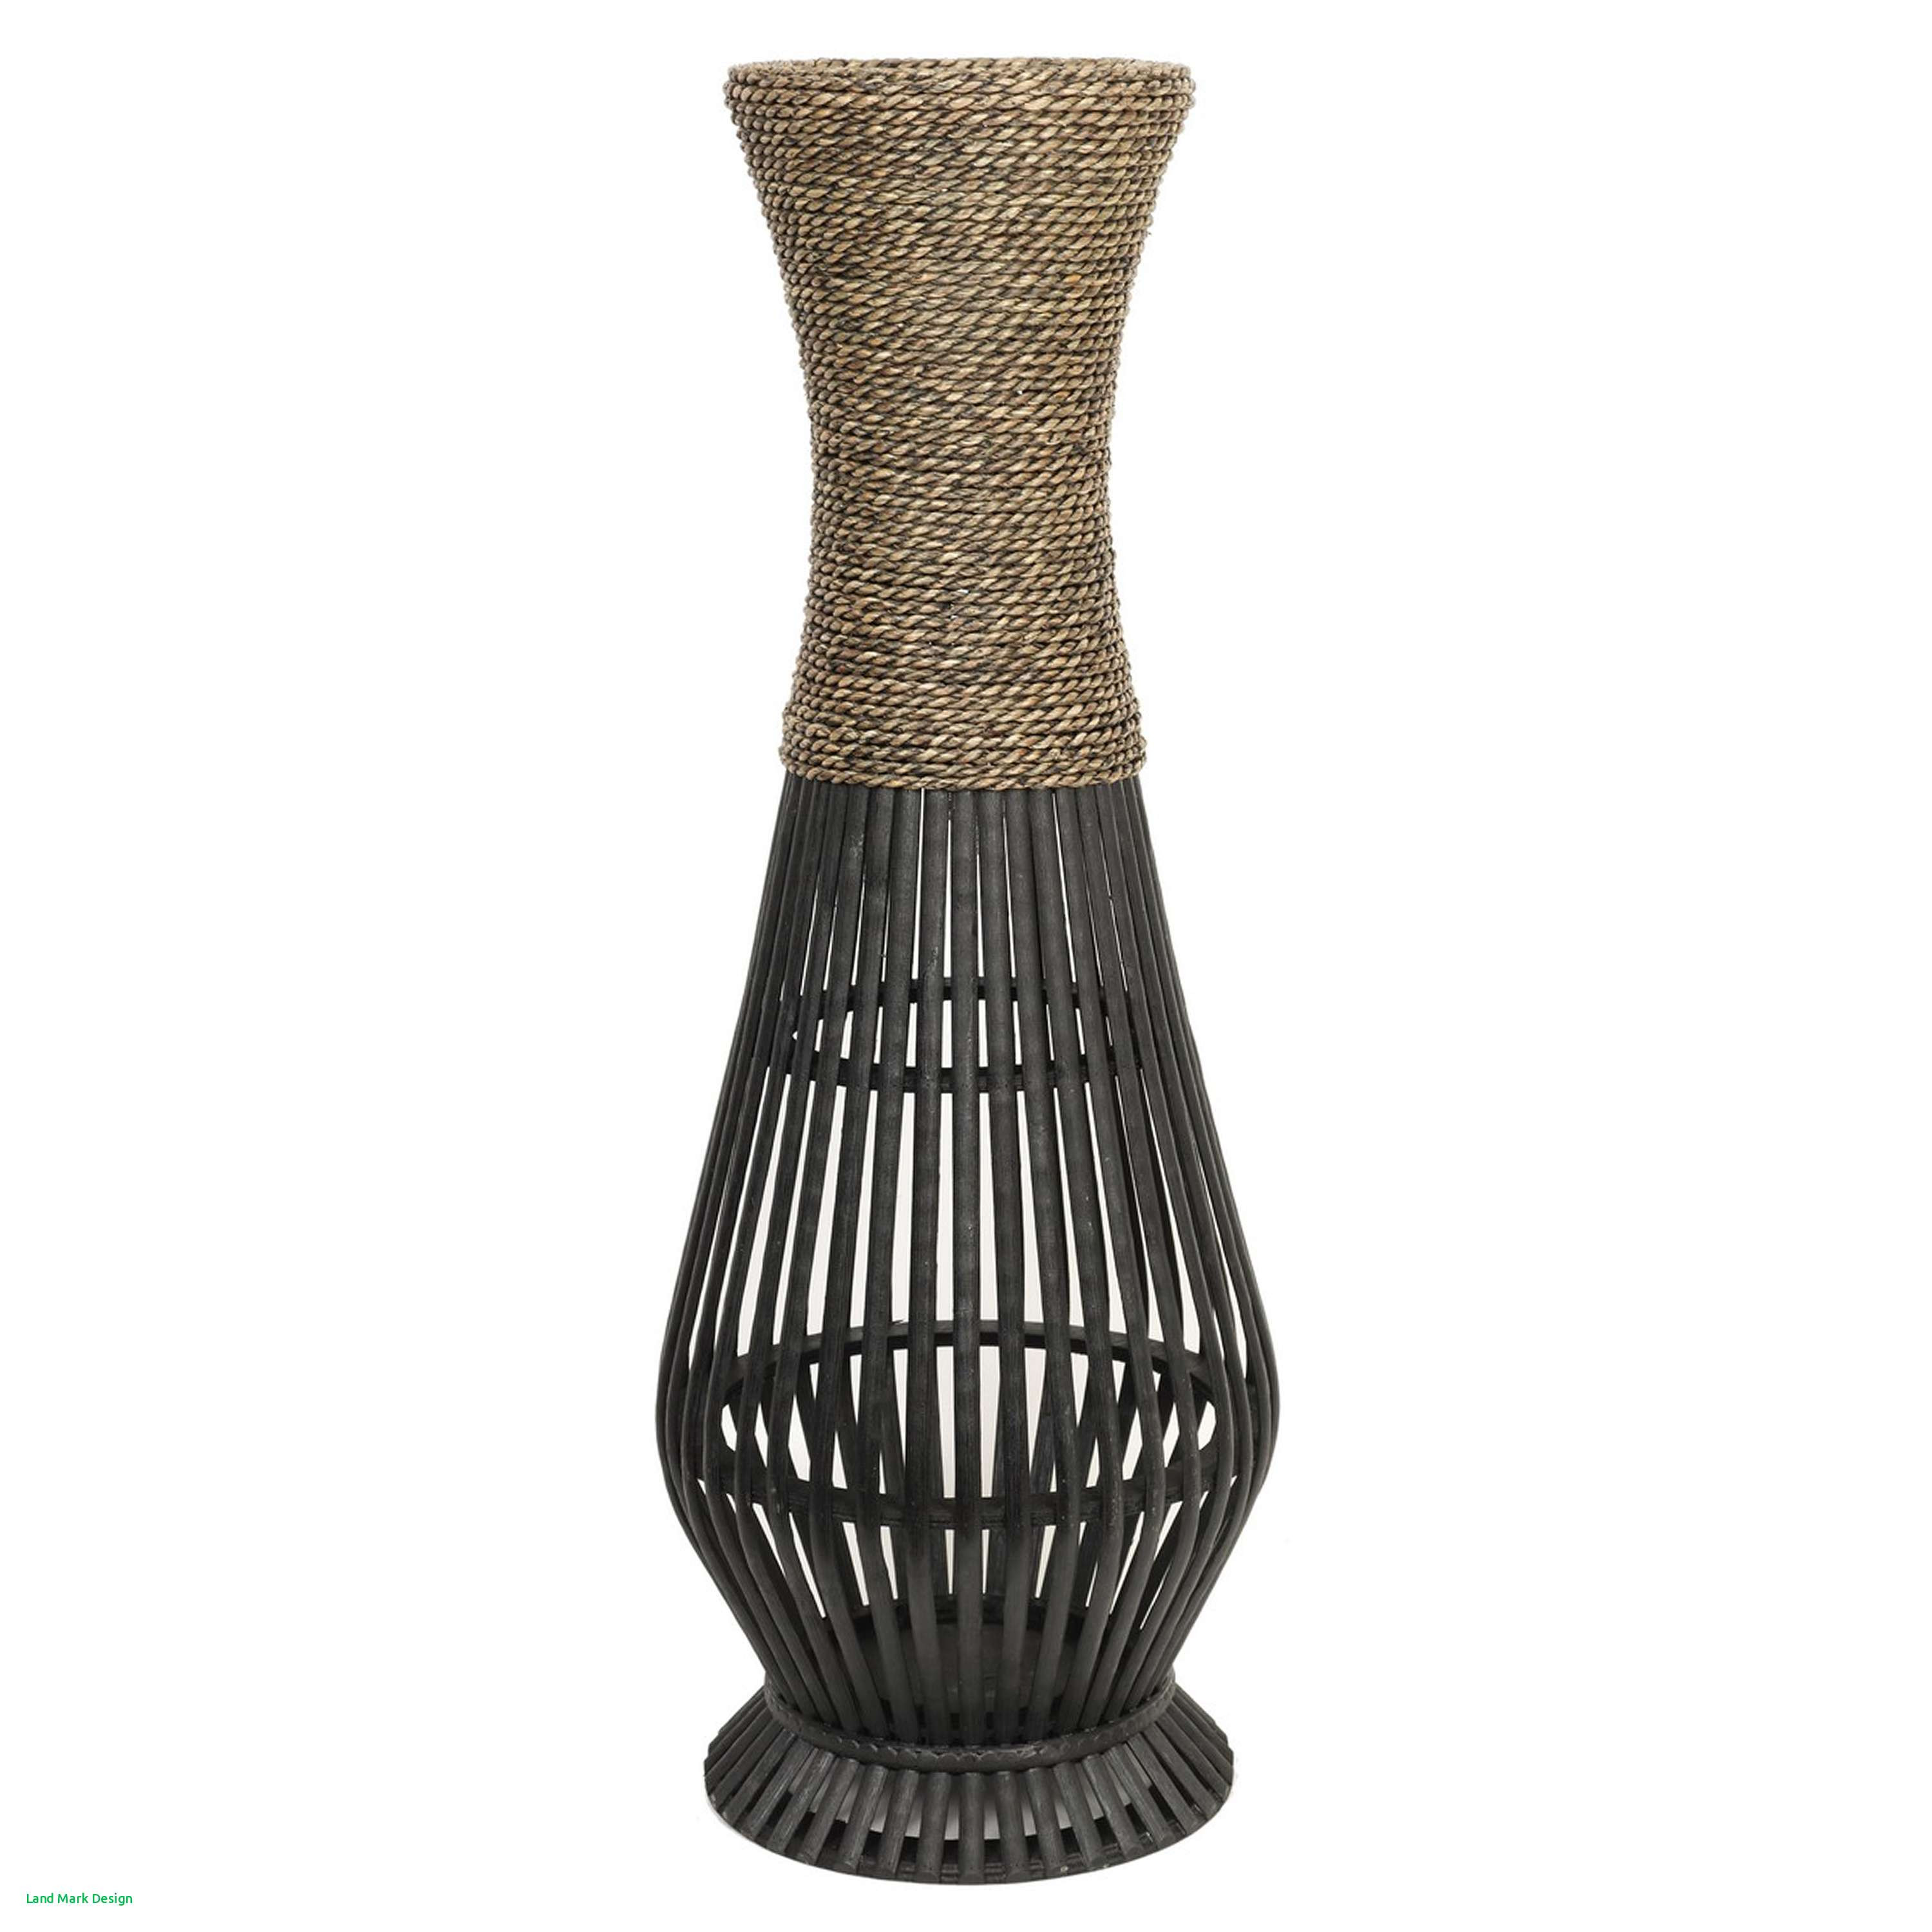 30 inch tall vases of tall wicker vase design home design throughout 0bcc0b57 c2d1 4c6d ae1c 6534a6faae99 1 vases wicker tall i 3d